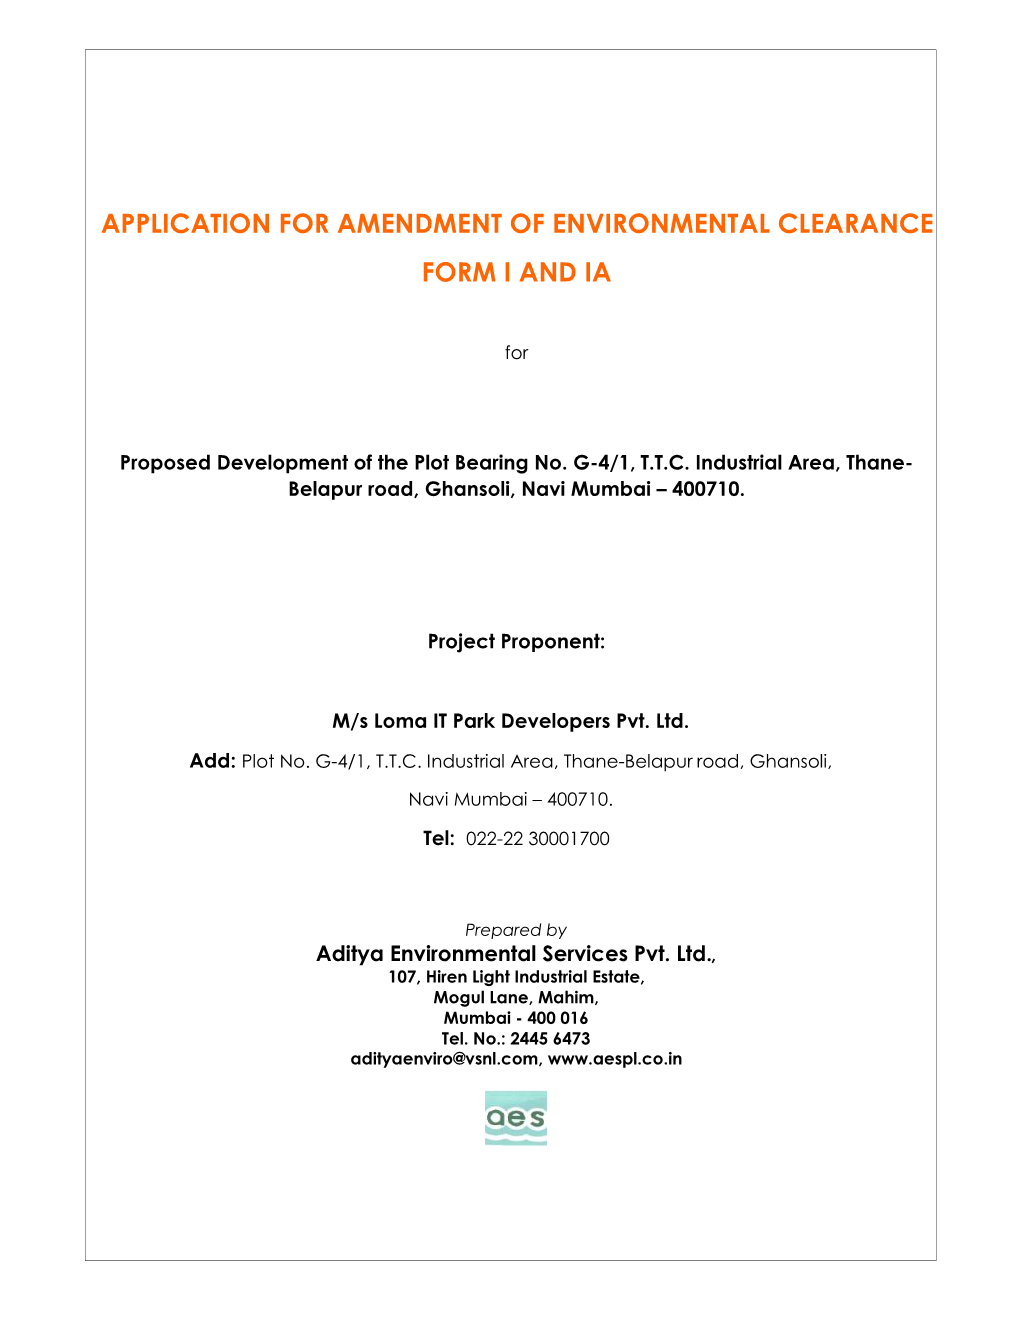 Application for Amendment of Environmental Clearance Form I and Ia